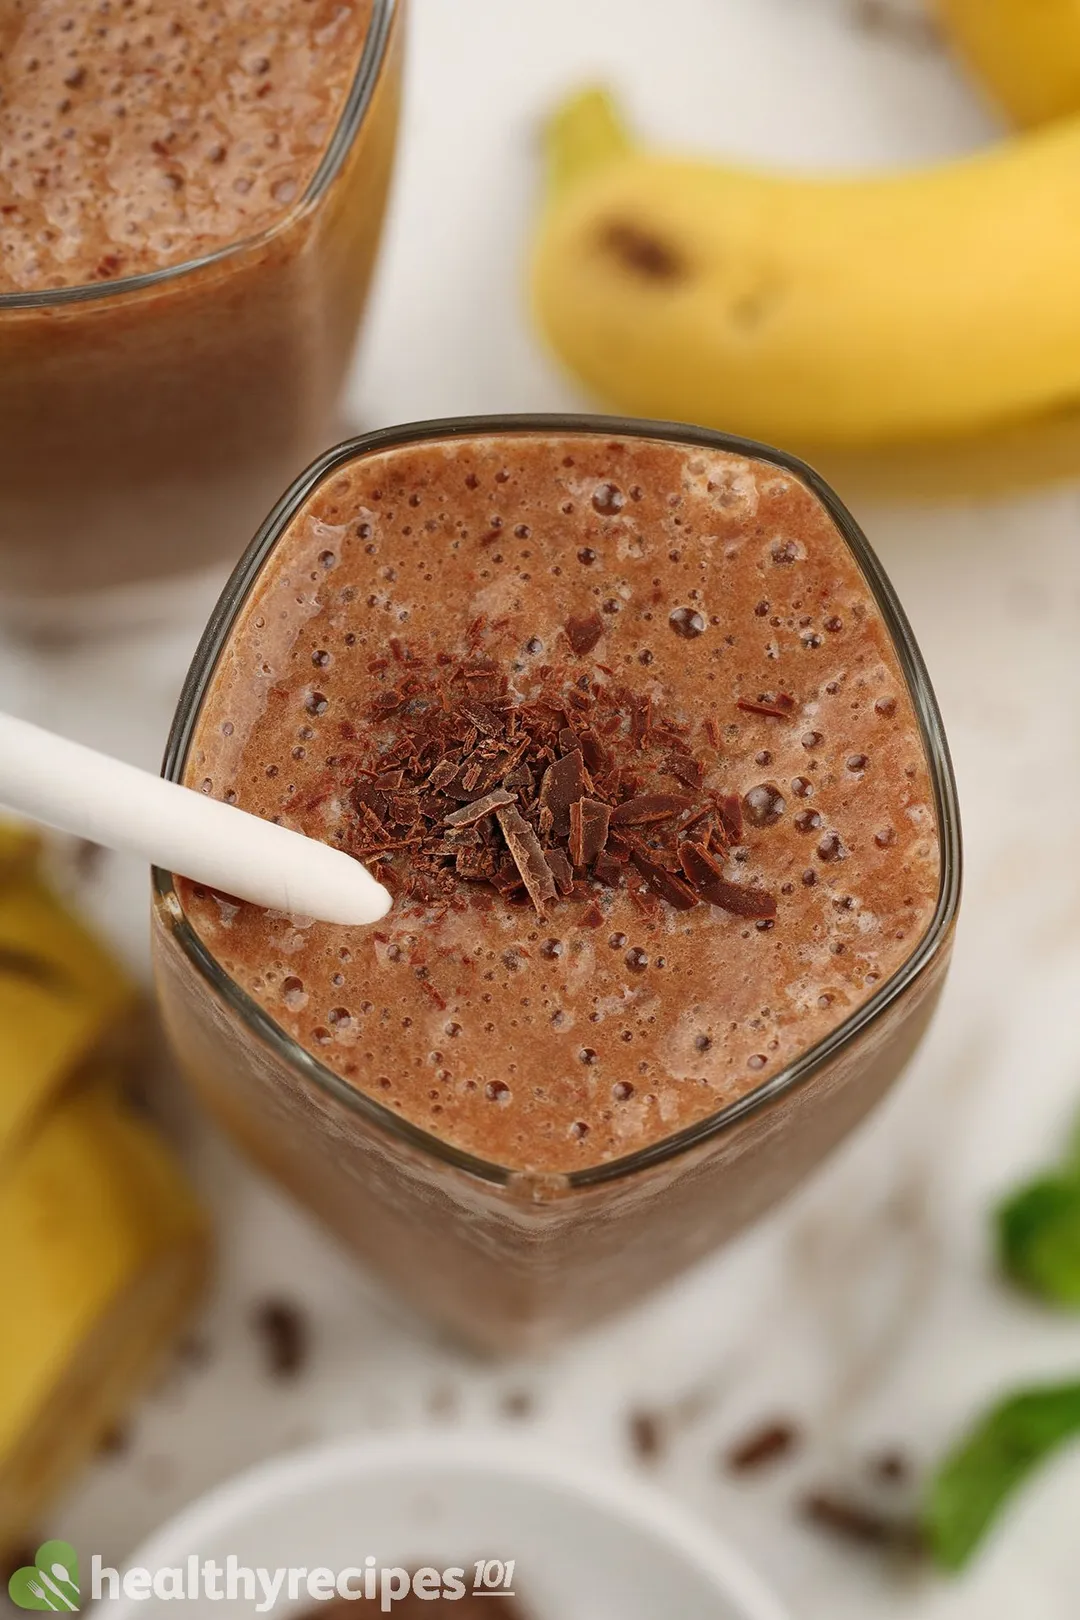 A high-angle shot of a glass of chocolate banana smoothie with yellow bananas in the blurred bottom background.